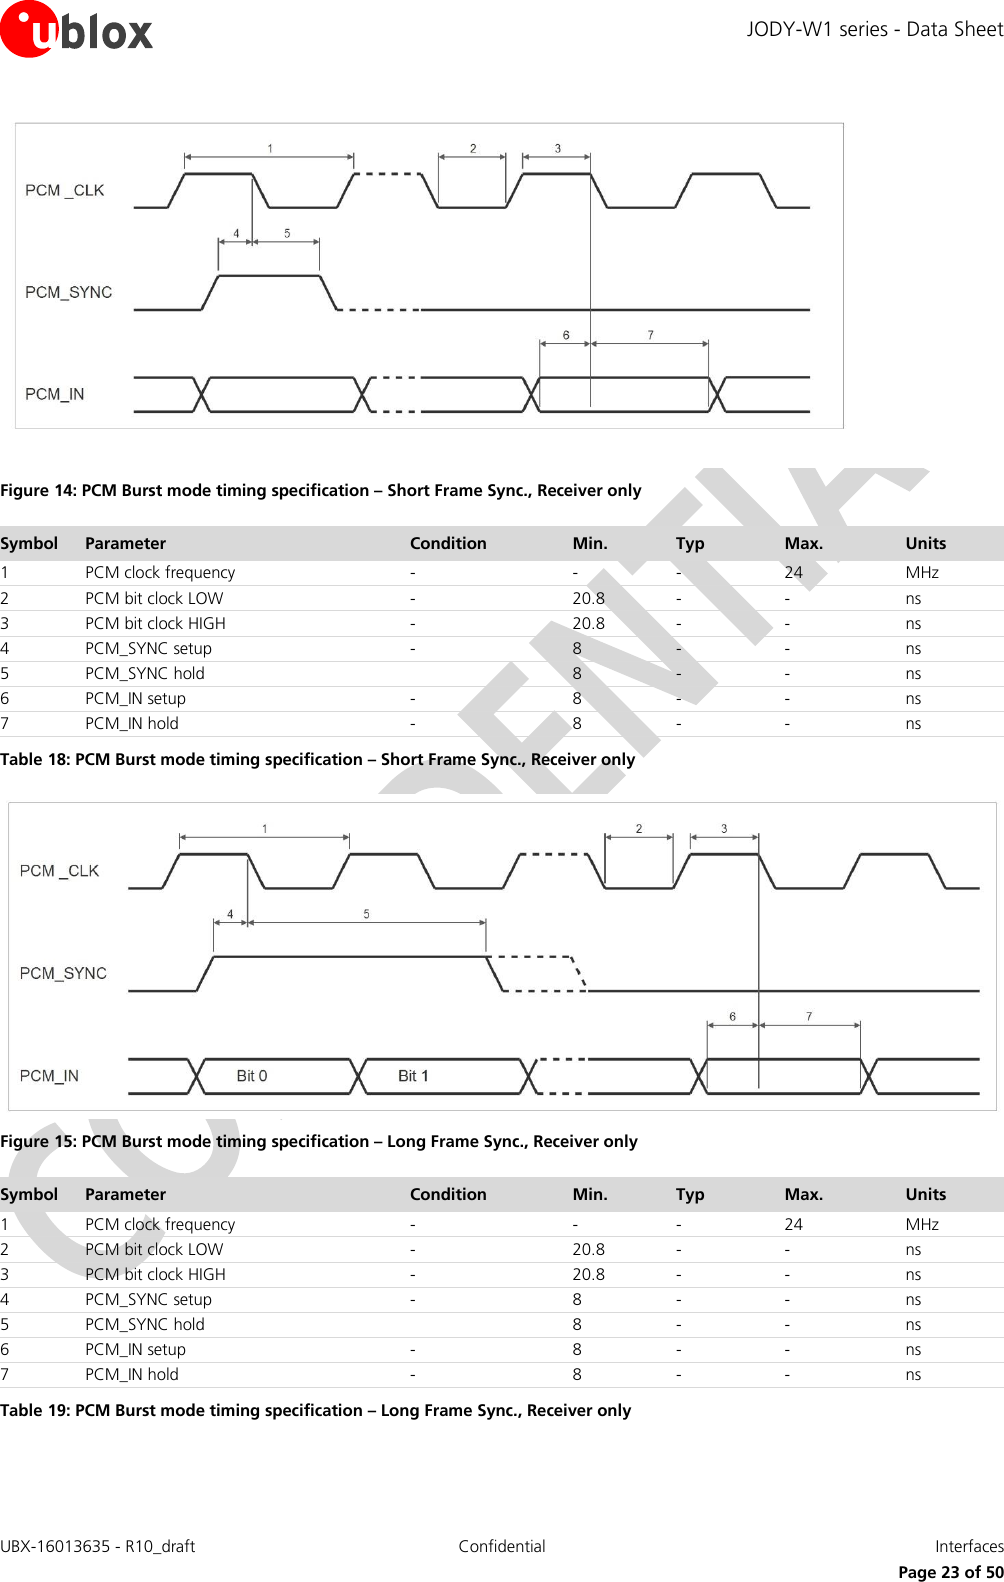 JODY-W1 series - Data Sheet UBX-16013635 - R10_draft Confidential  Interfaces     Page 23 of 50  Figure 14: PCM Burst mode timing specification – Short Frame Sync., Receiver only Symbol Parameter Condition Min.        Typ Max. Units 1 PCM clock frequency - - - 24 MHz 2 PCM bit clock LOW - 20.8 - - ns 3 PCM bit clock HIGH - 20.8 - - ns 4 PCM_SYNC setup - 8 - - ns 5 PCM_SYNC hold  8 - - ns 6 PCM_IN setup - 8 - - ns 7 PCM_IN hold - 8 - - ns Table 18: PCM Burst mode timing specification – Short Frame Sync., Receiver only  Figure 15: PCM Burst mode timing specification – Long Frame Sync., Receiver only  Symbol Parameter Condition Min.        Typ Max. Units 1 PCM clock frequency - - - 24 MHz 2 PCM bit clock LOW - 20.8 - - ns 3 PCM bit clock HIGH - 20.8 - - ns 4 PCM_SYNC setup - 8 - - ns 5 PCM_SYNC hold  8 - - ns 6 PCM_IN setup - 8 - - ns 7 PCM_IN hold - 8 - - ns Table 19: PCM Burst mode timing specification – Long Frame Sync., Receiver only  